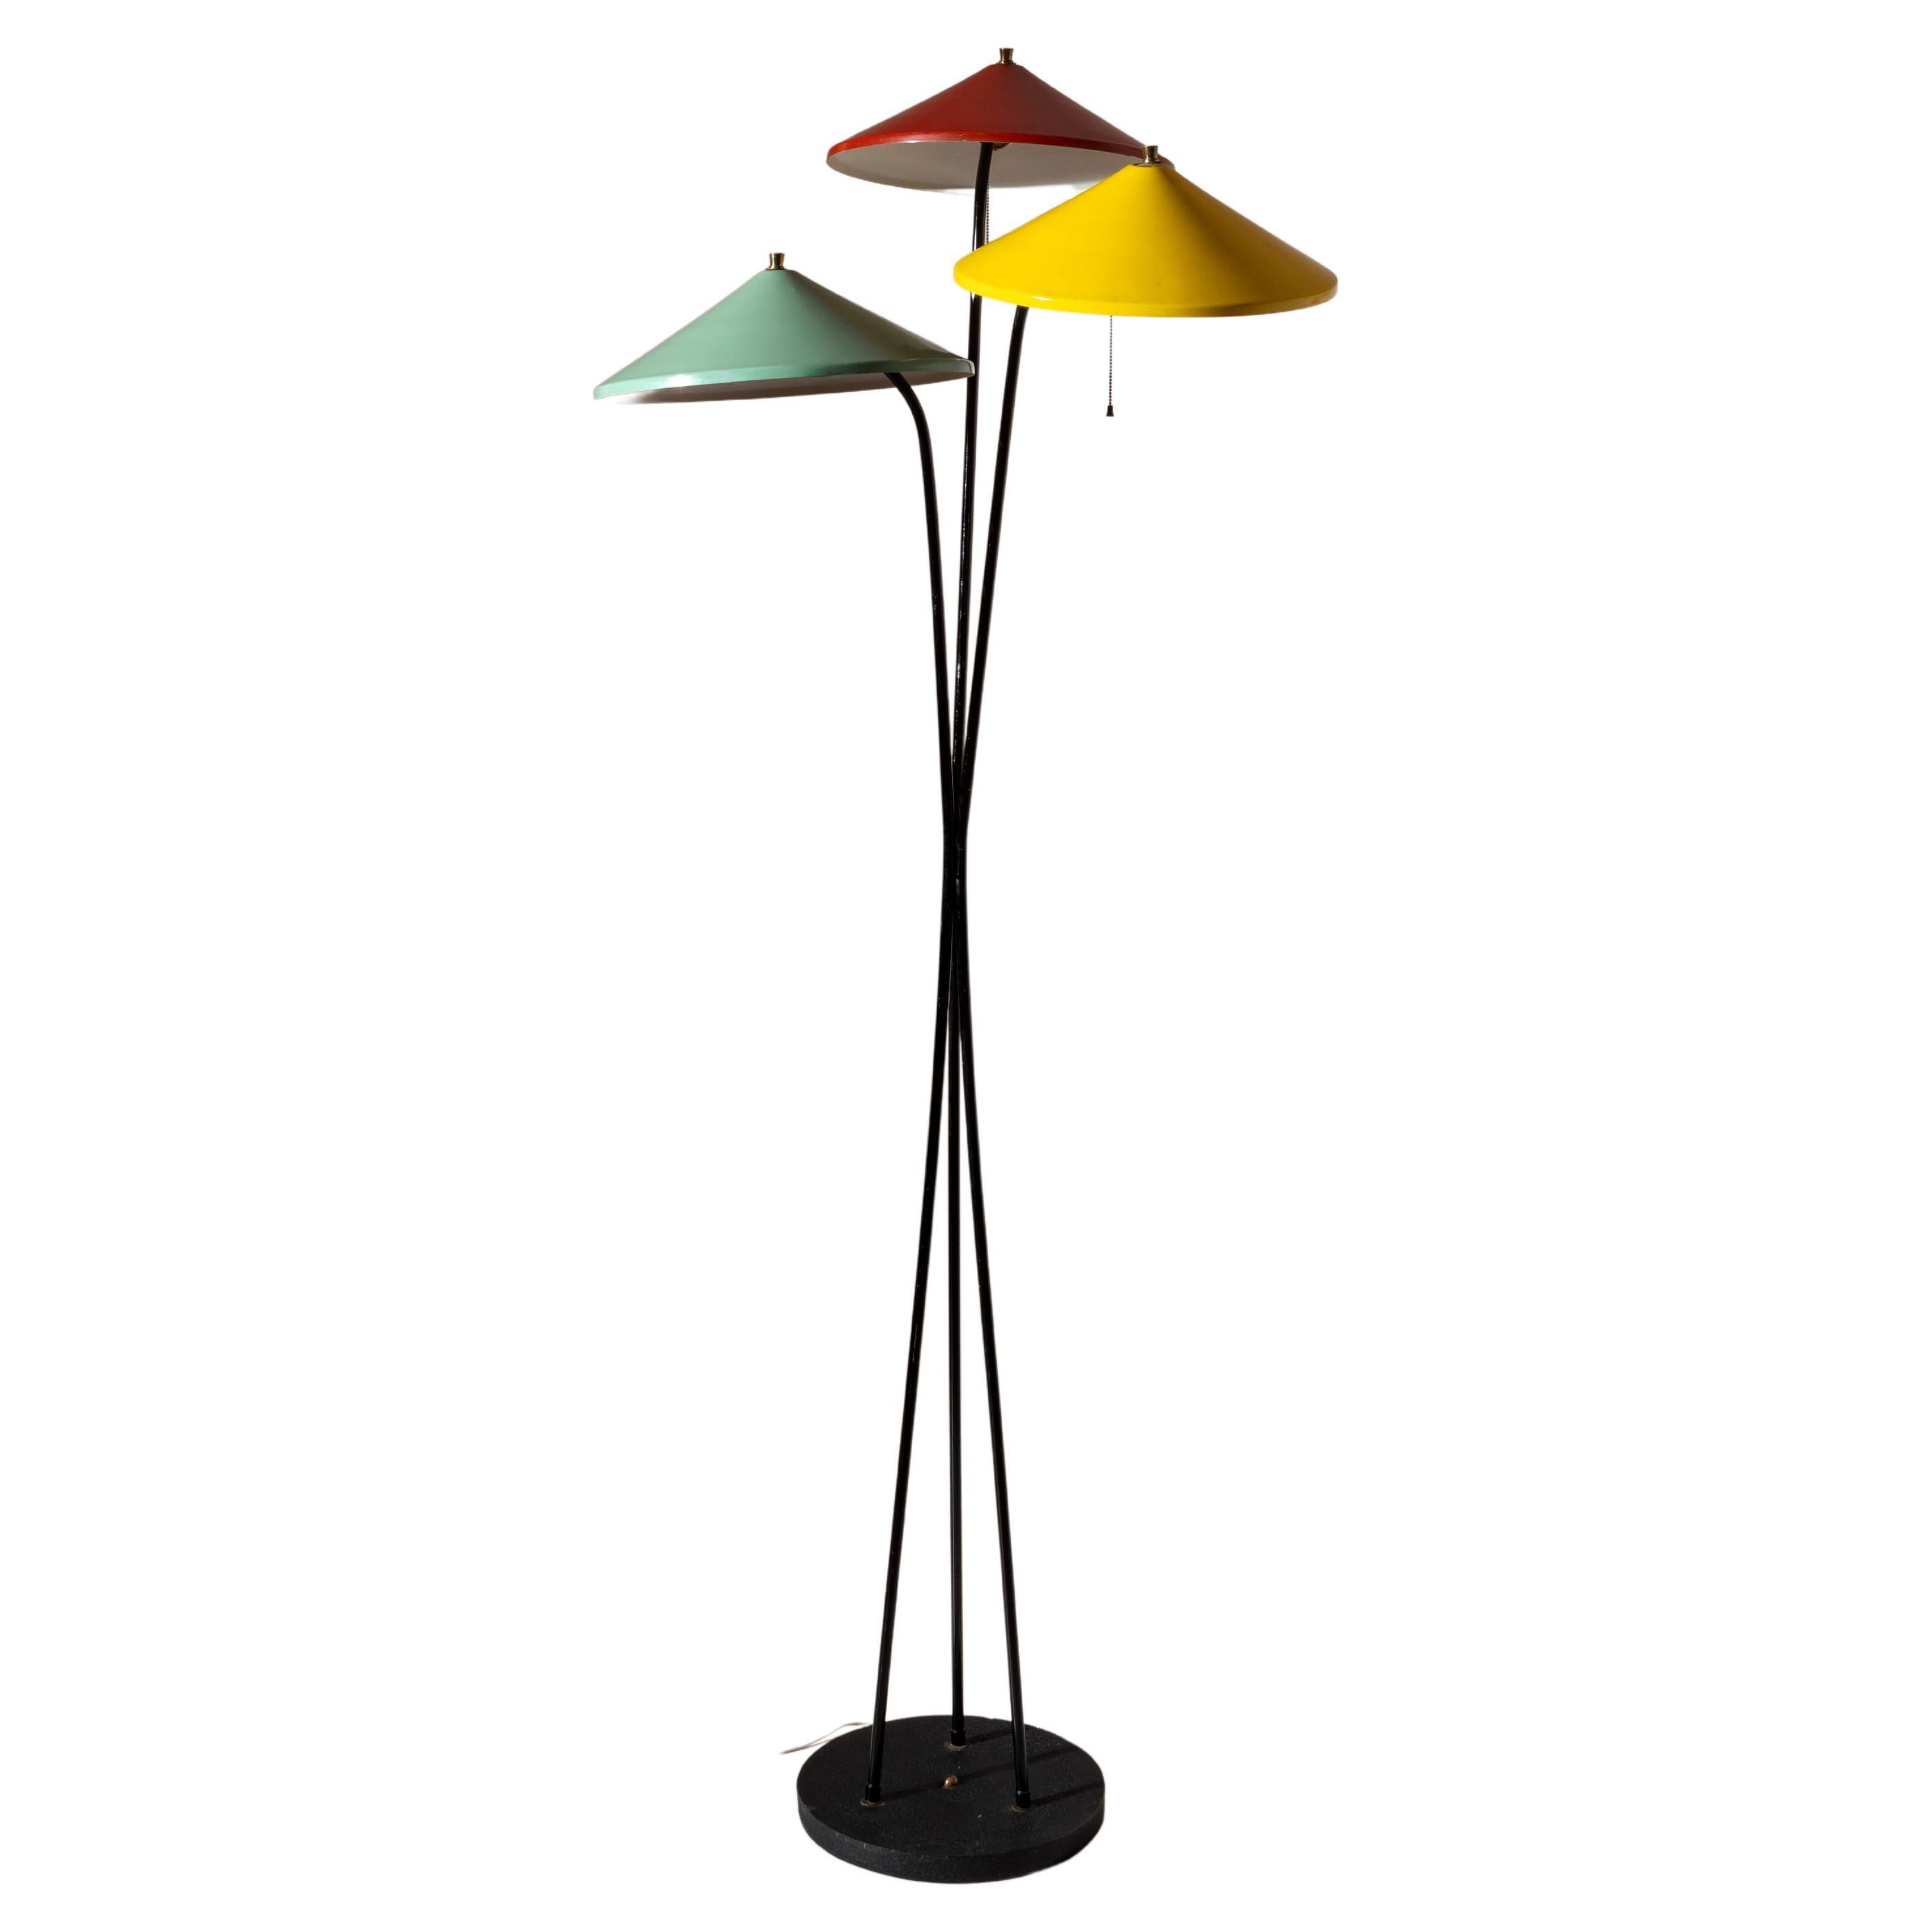 Stilnovo floor lamp in metal with colored lampshades, Italy, 1950s